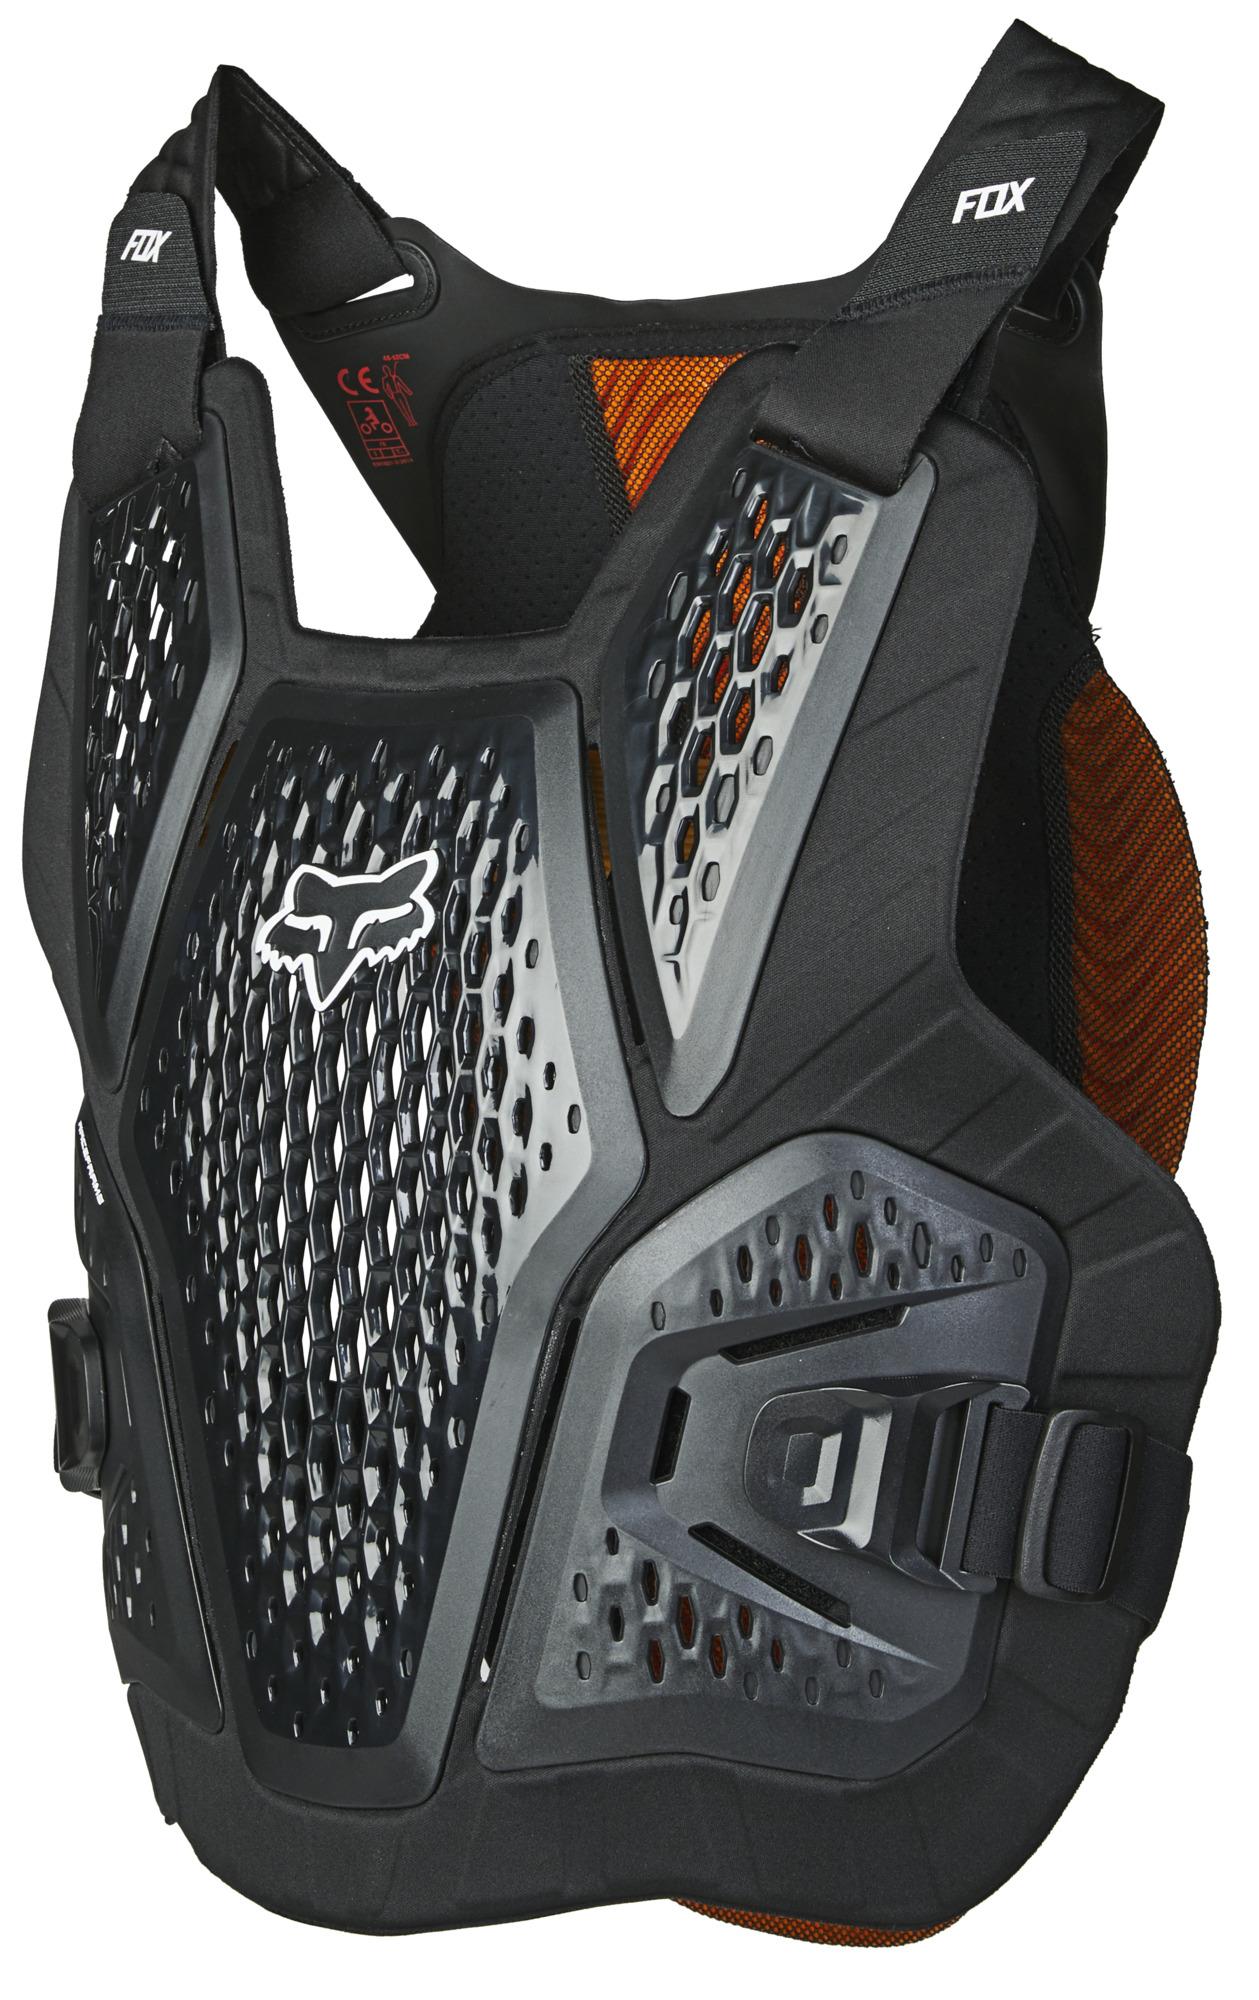 Fox Racing Raceframe Impact D30 Chest Protector - Black